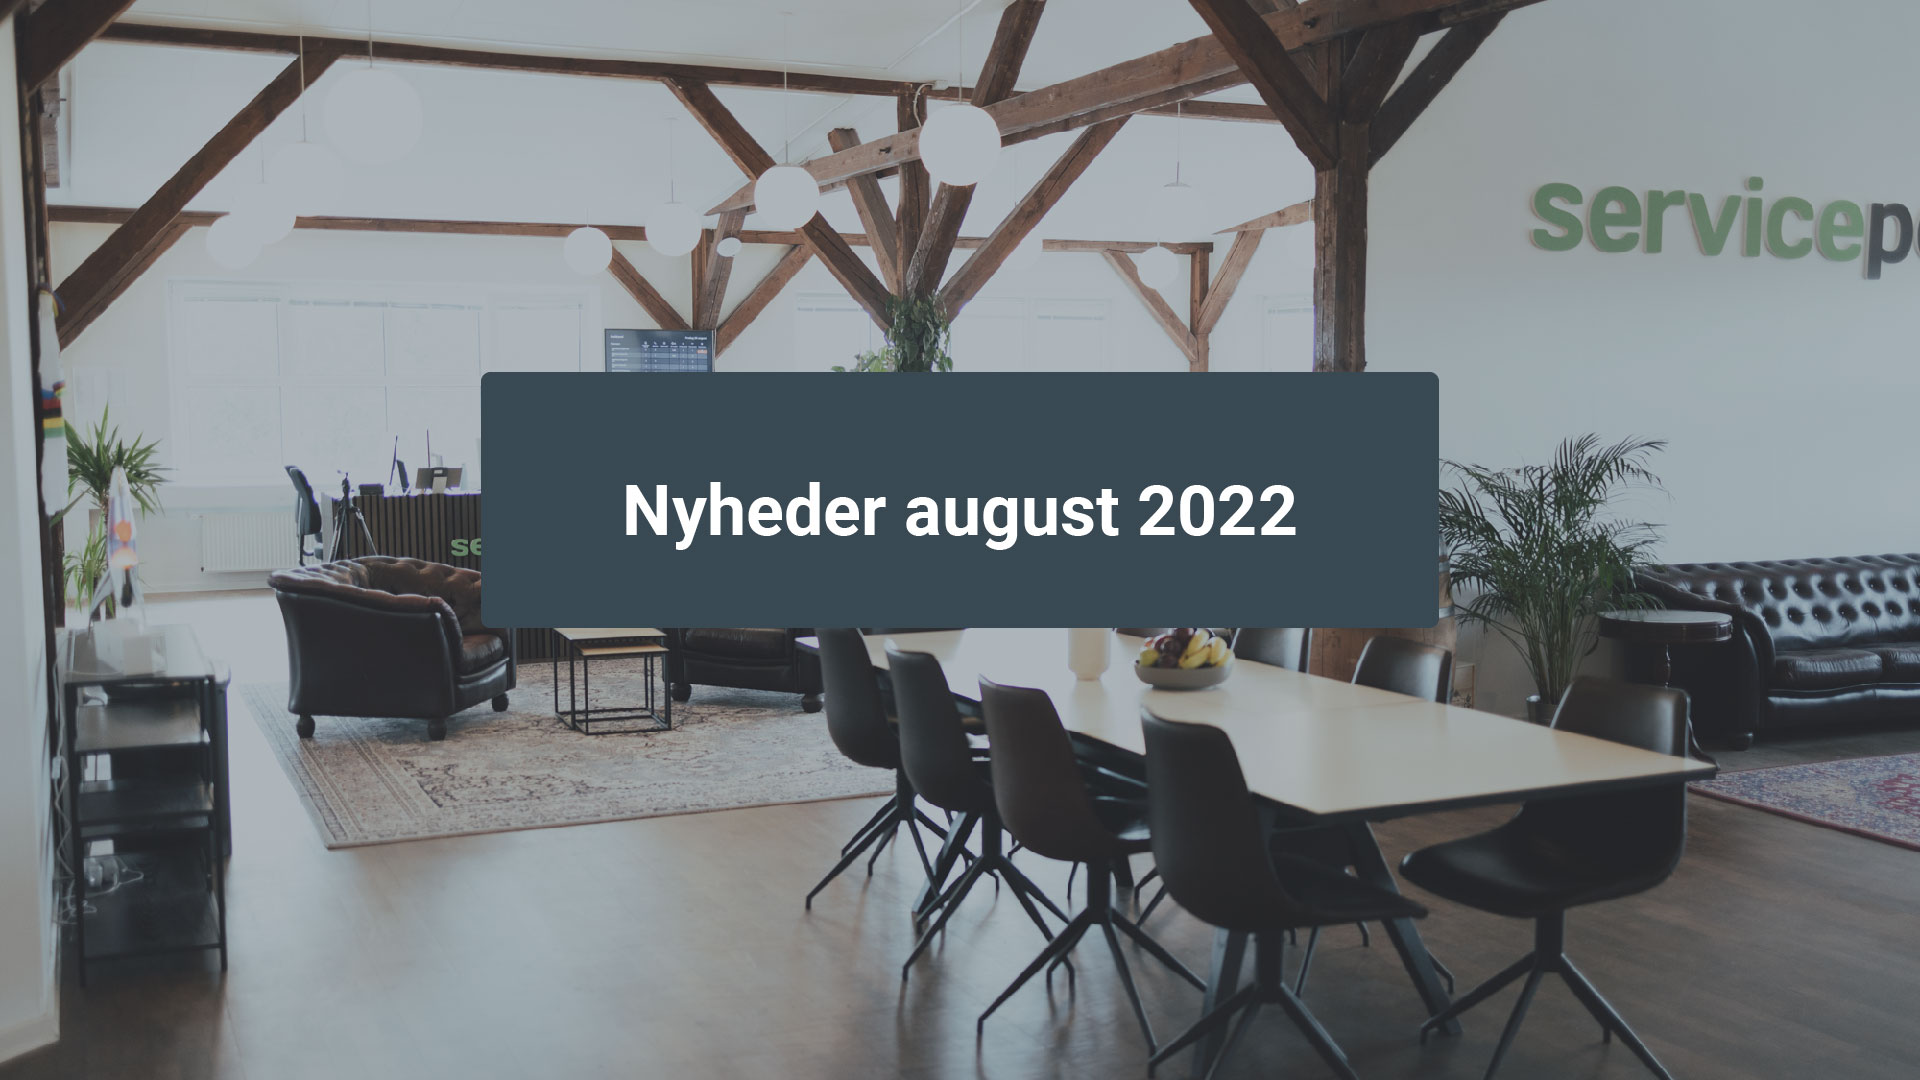 Nyheder august 2022